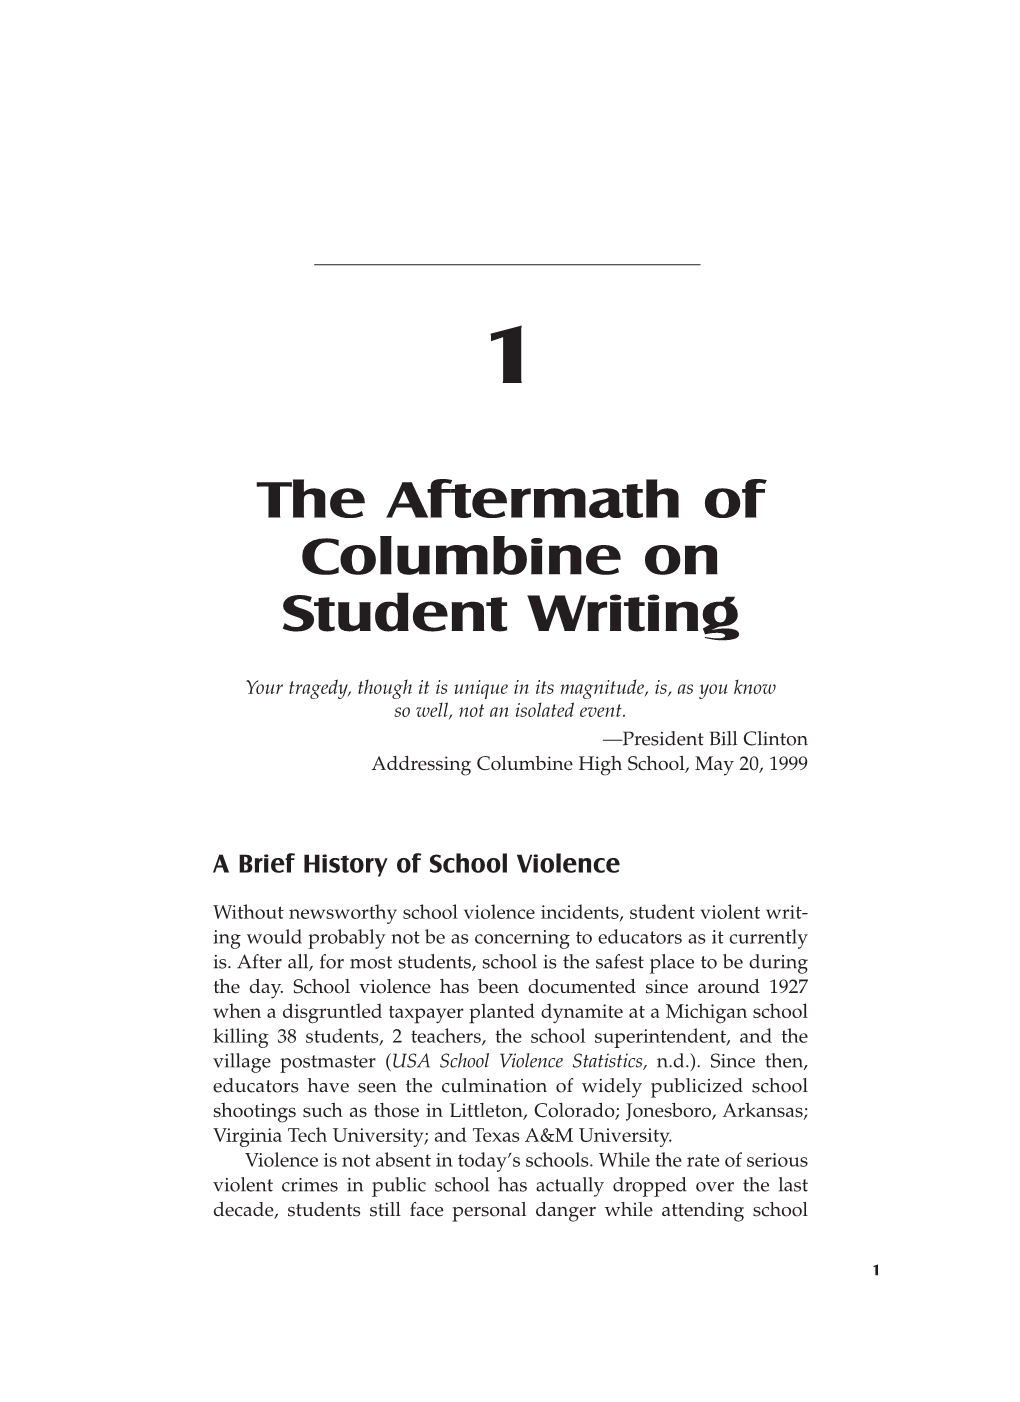 The Aftermath of Columbine on Student Writing